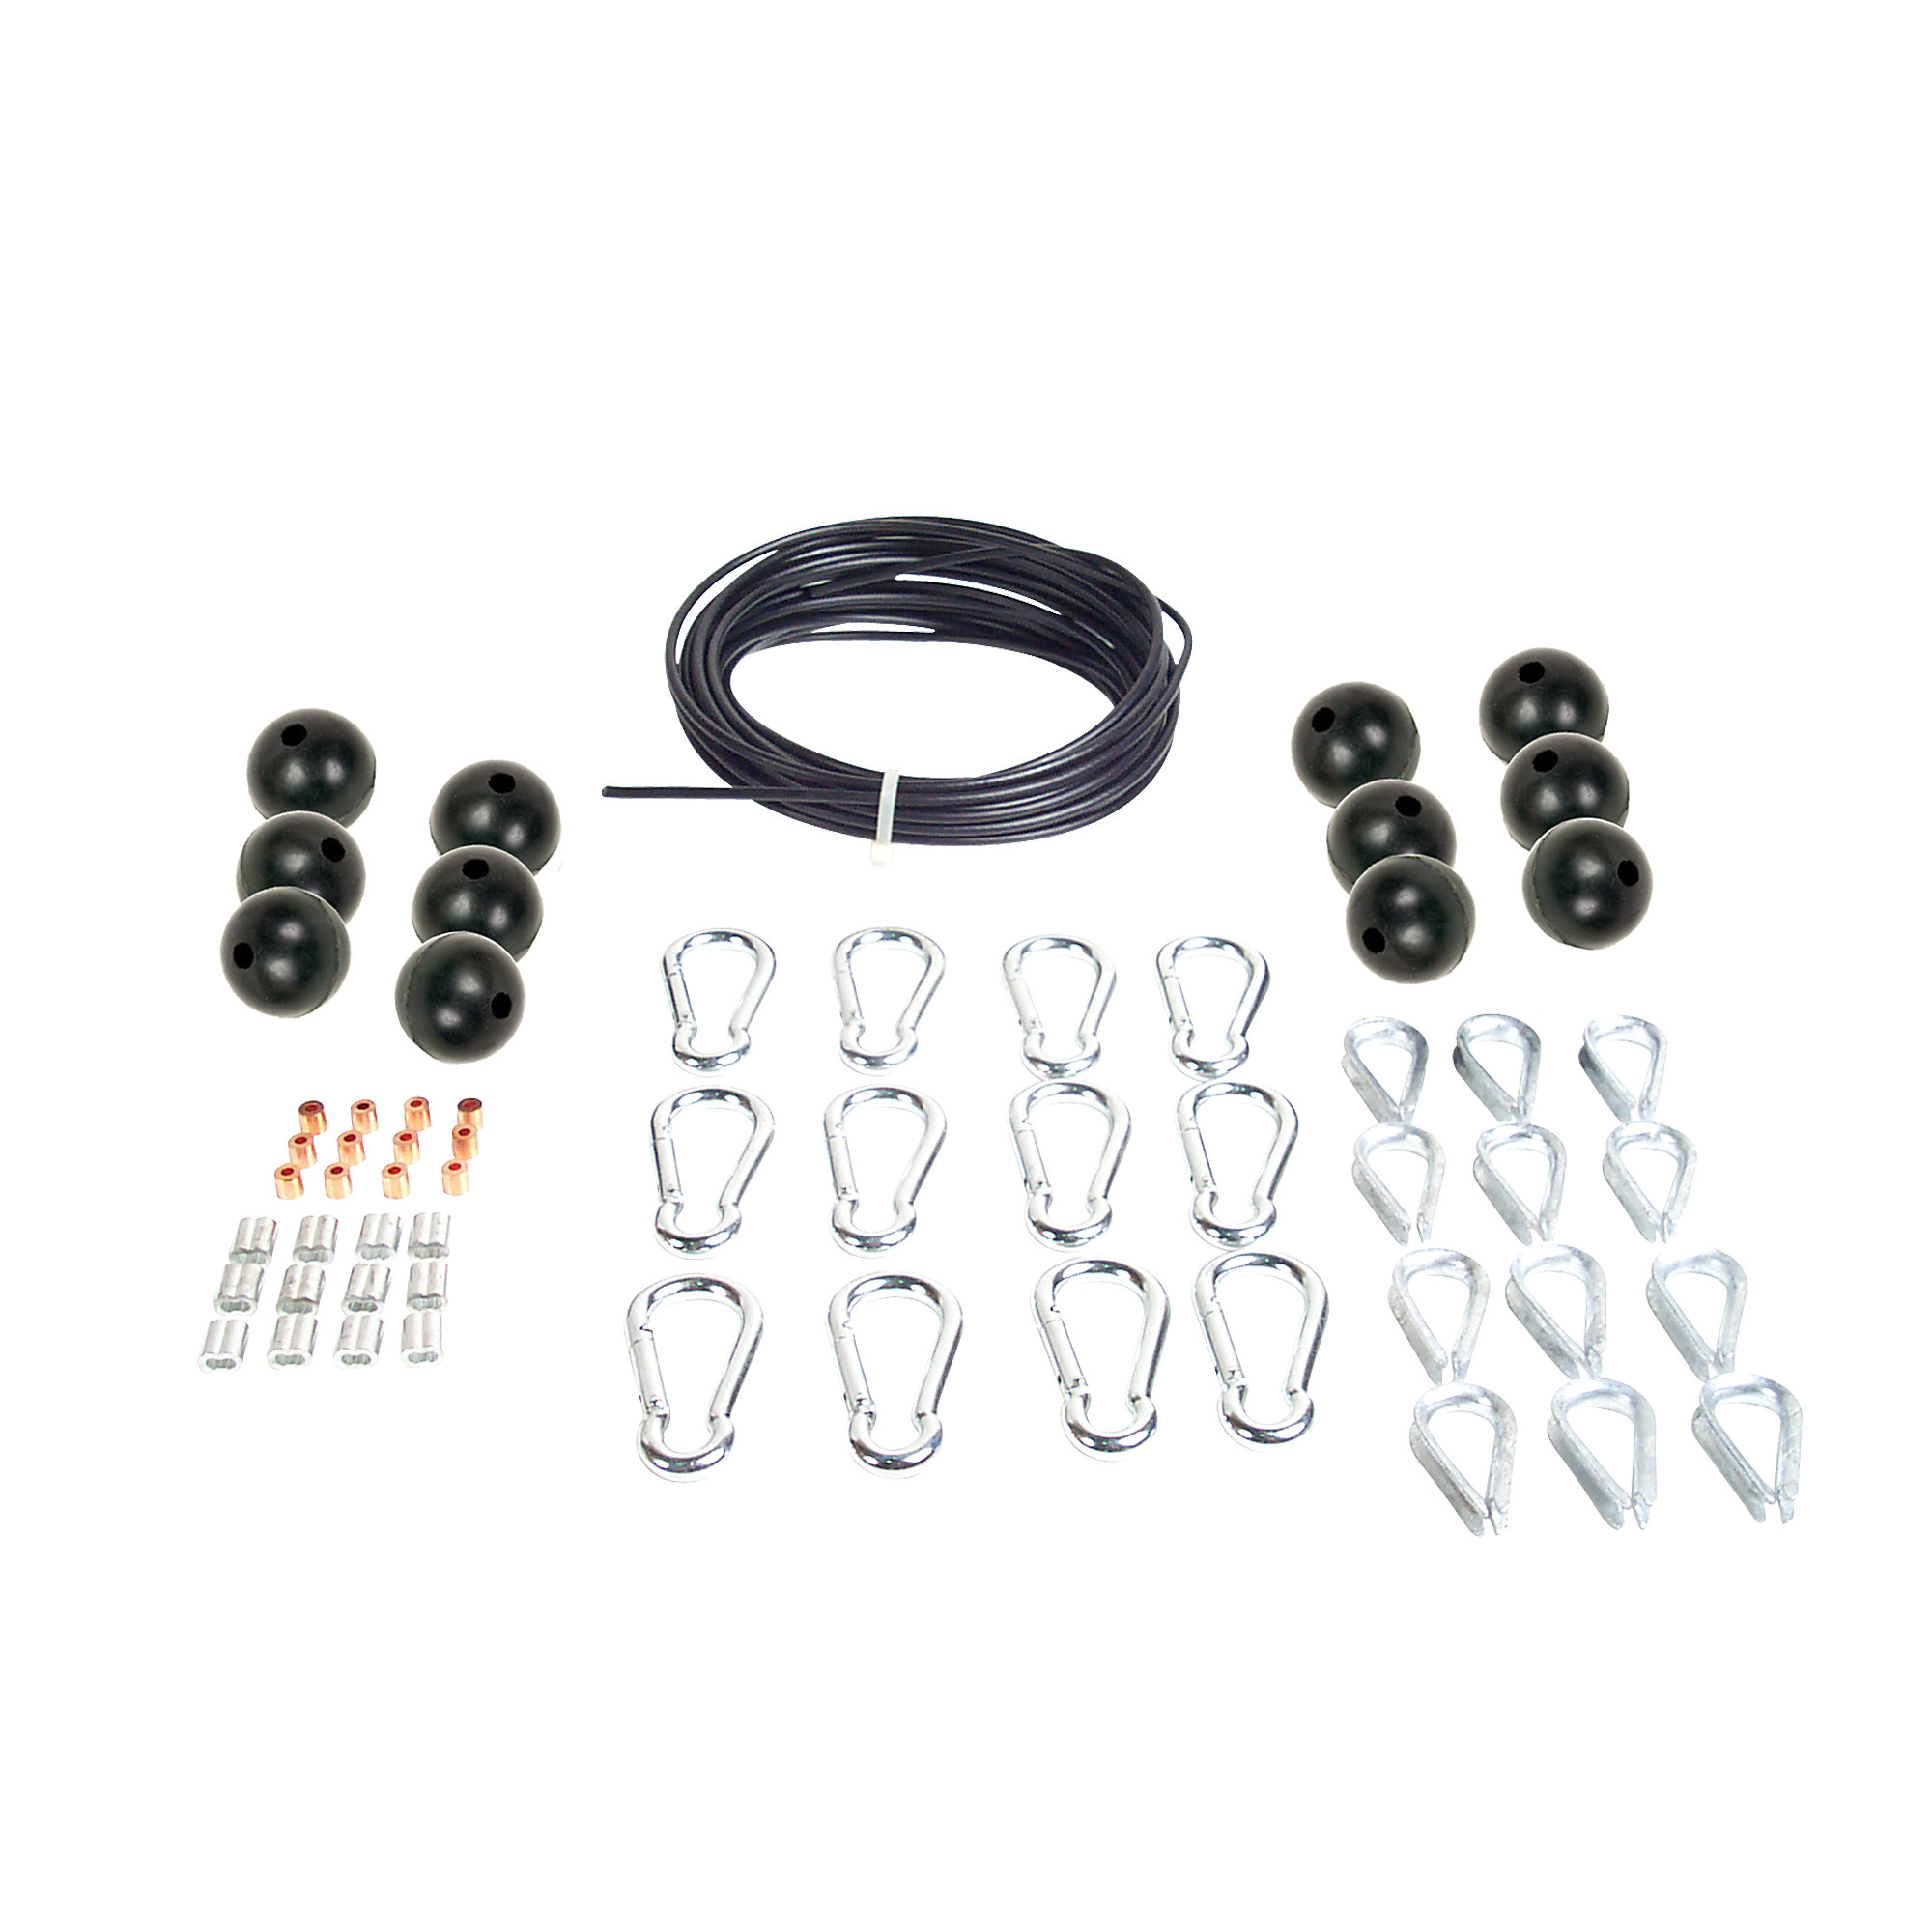 3/16" Cable and Hardware Kit